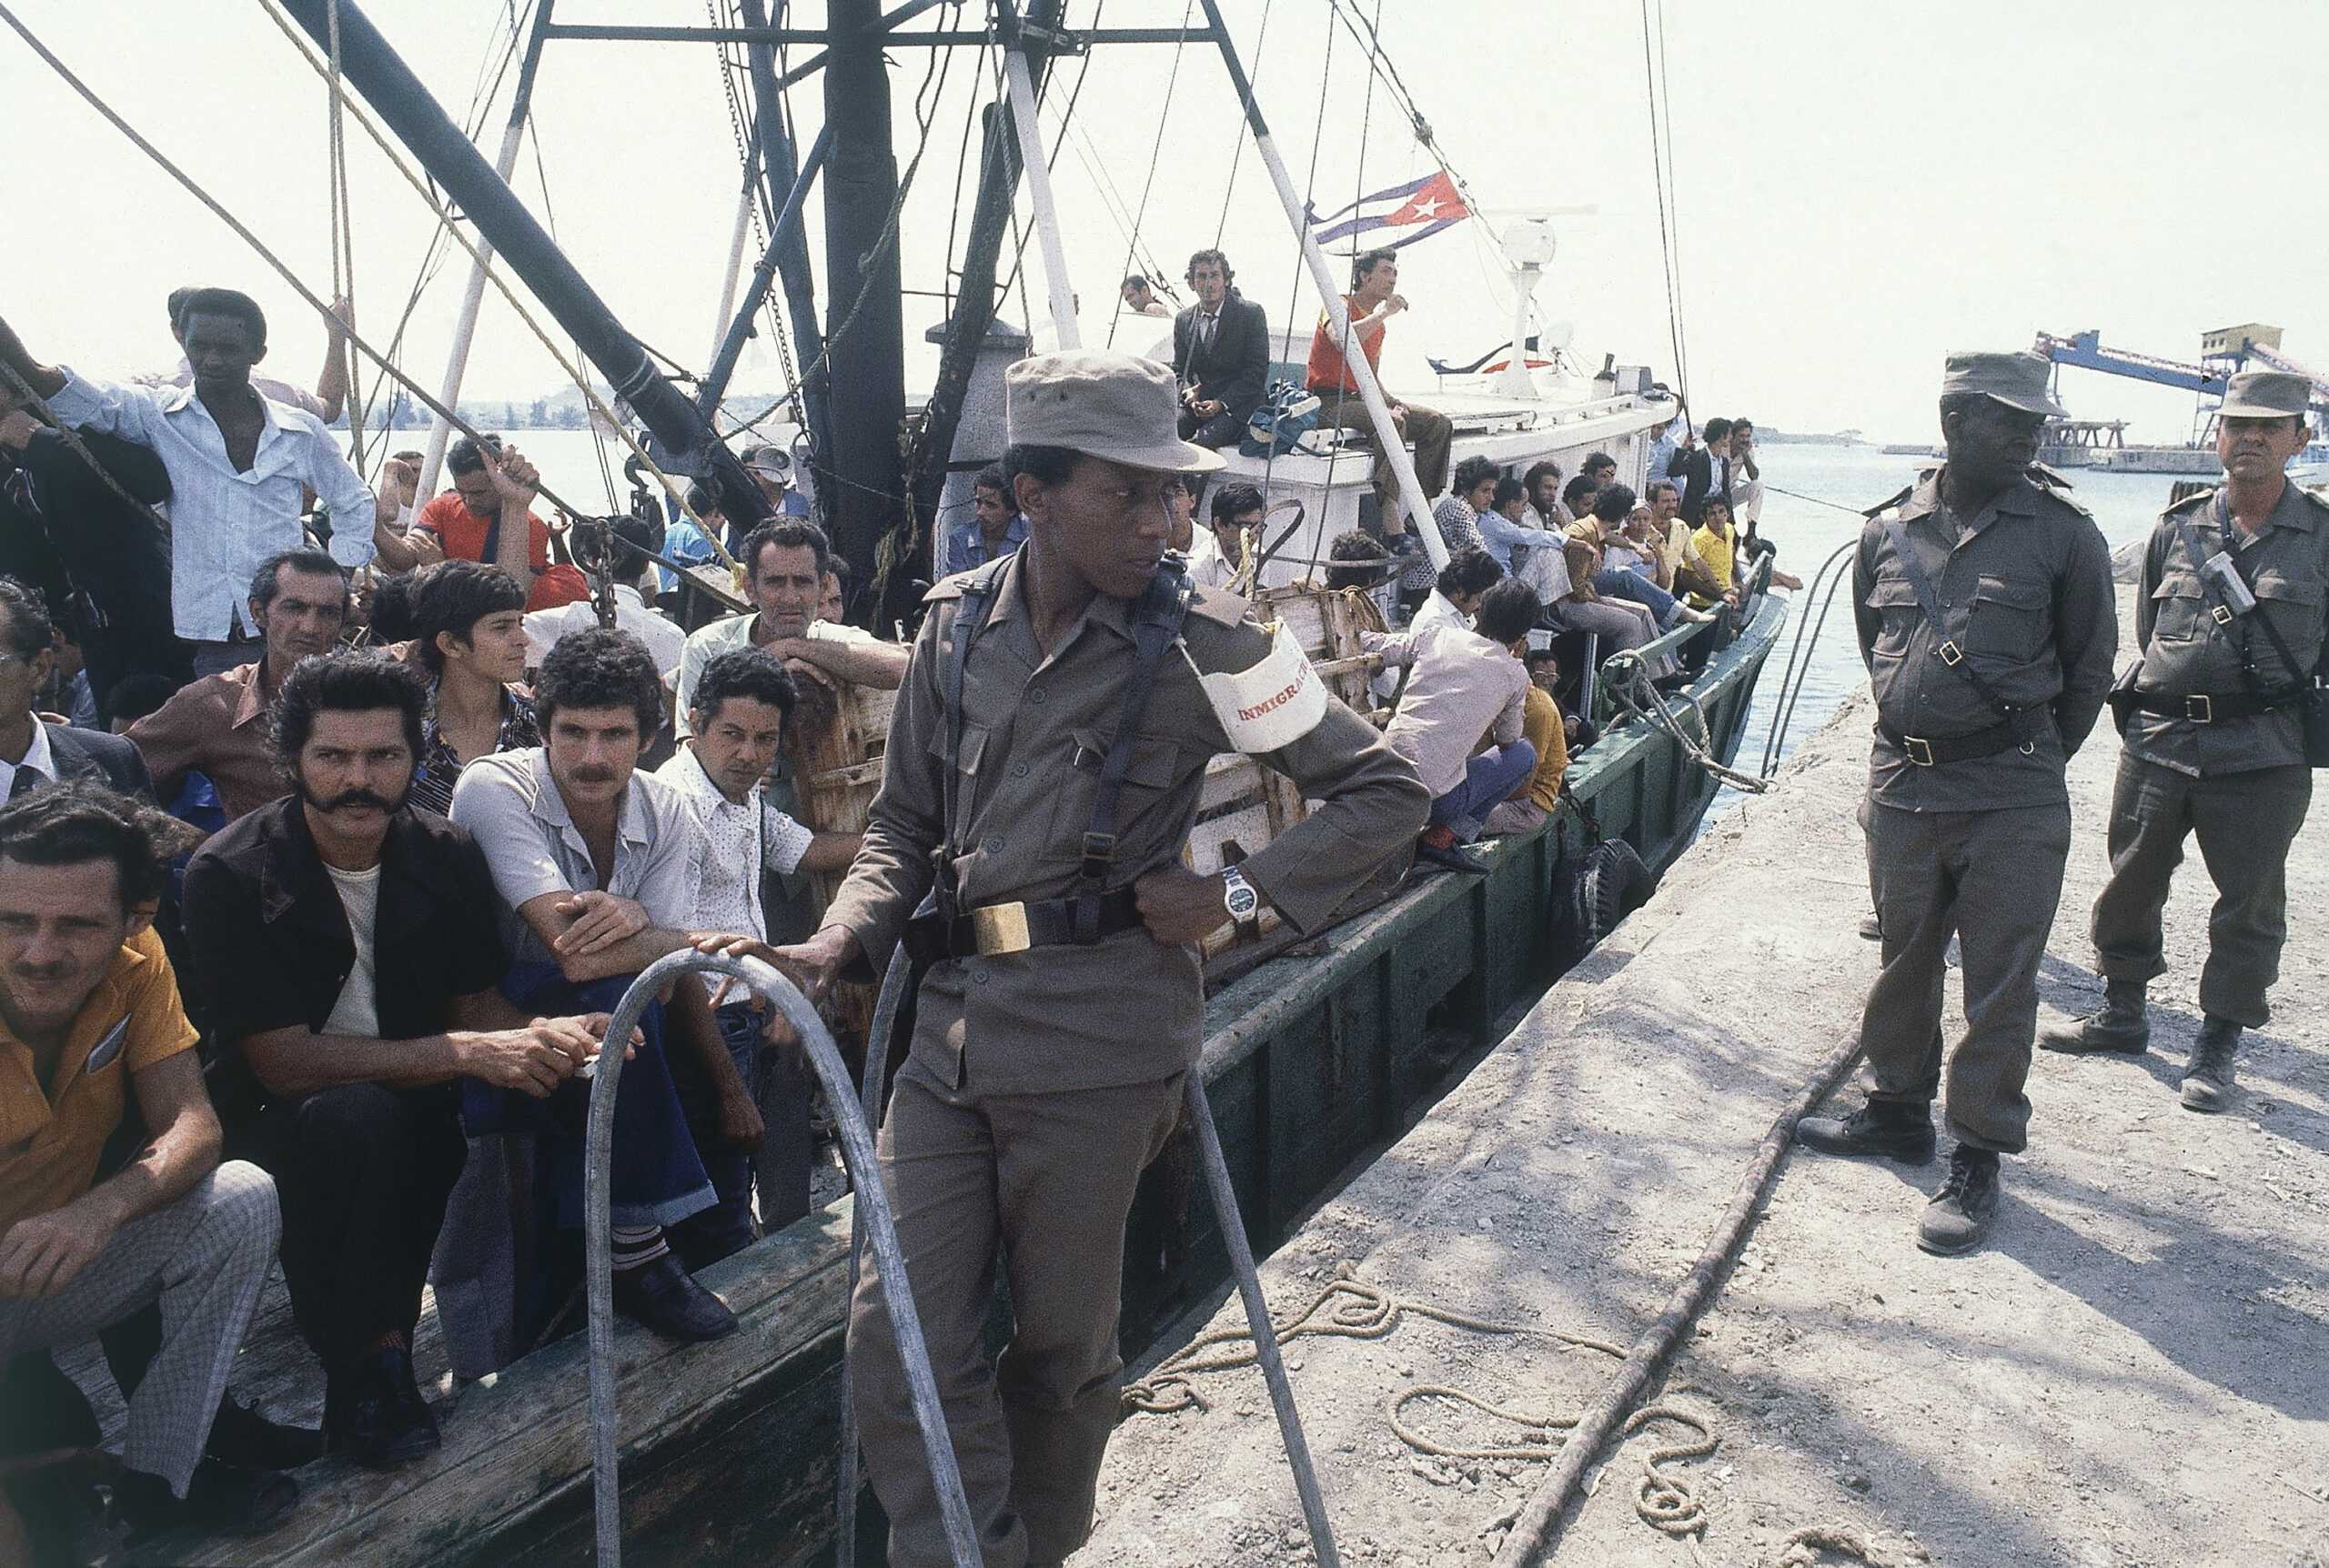 A Cuban soldier stands by a refugee ship at the small port of Mariel, Cuba, as the refugees aboard wait to sail for U.S.